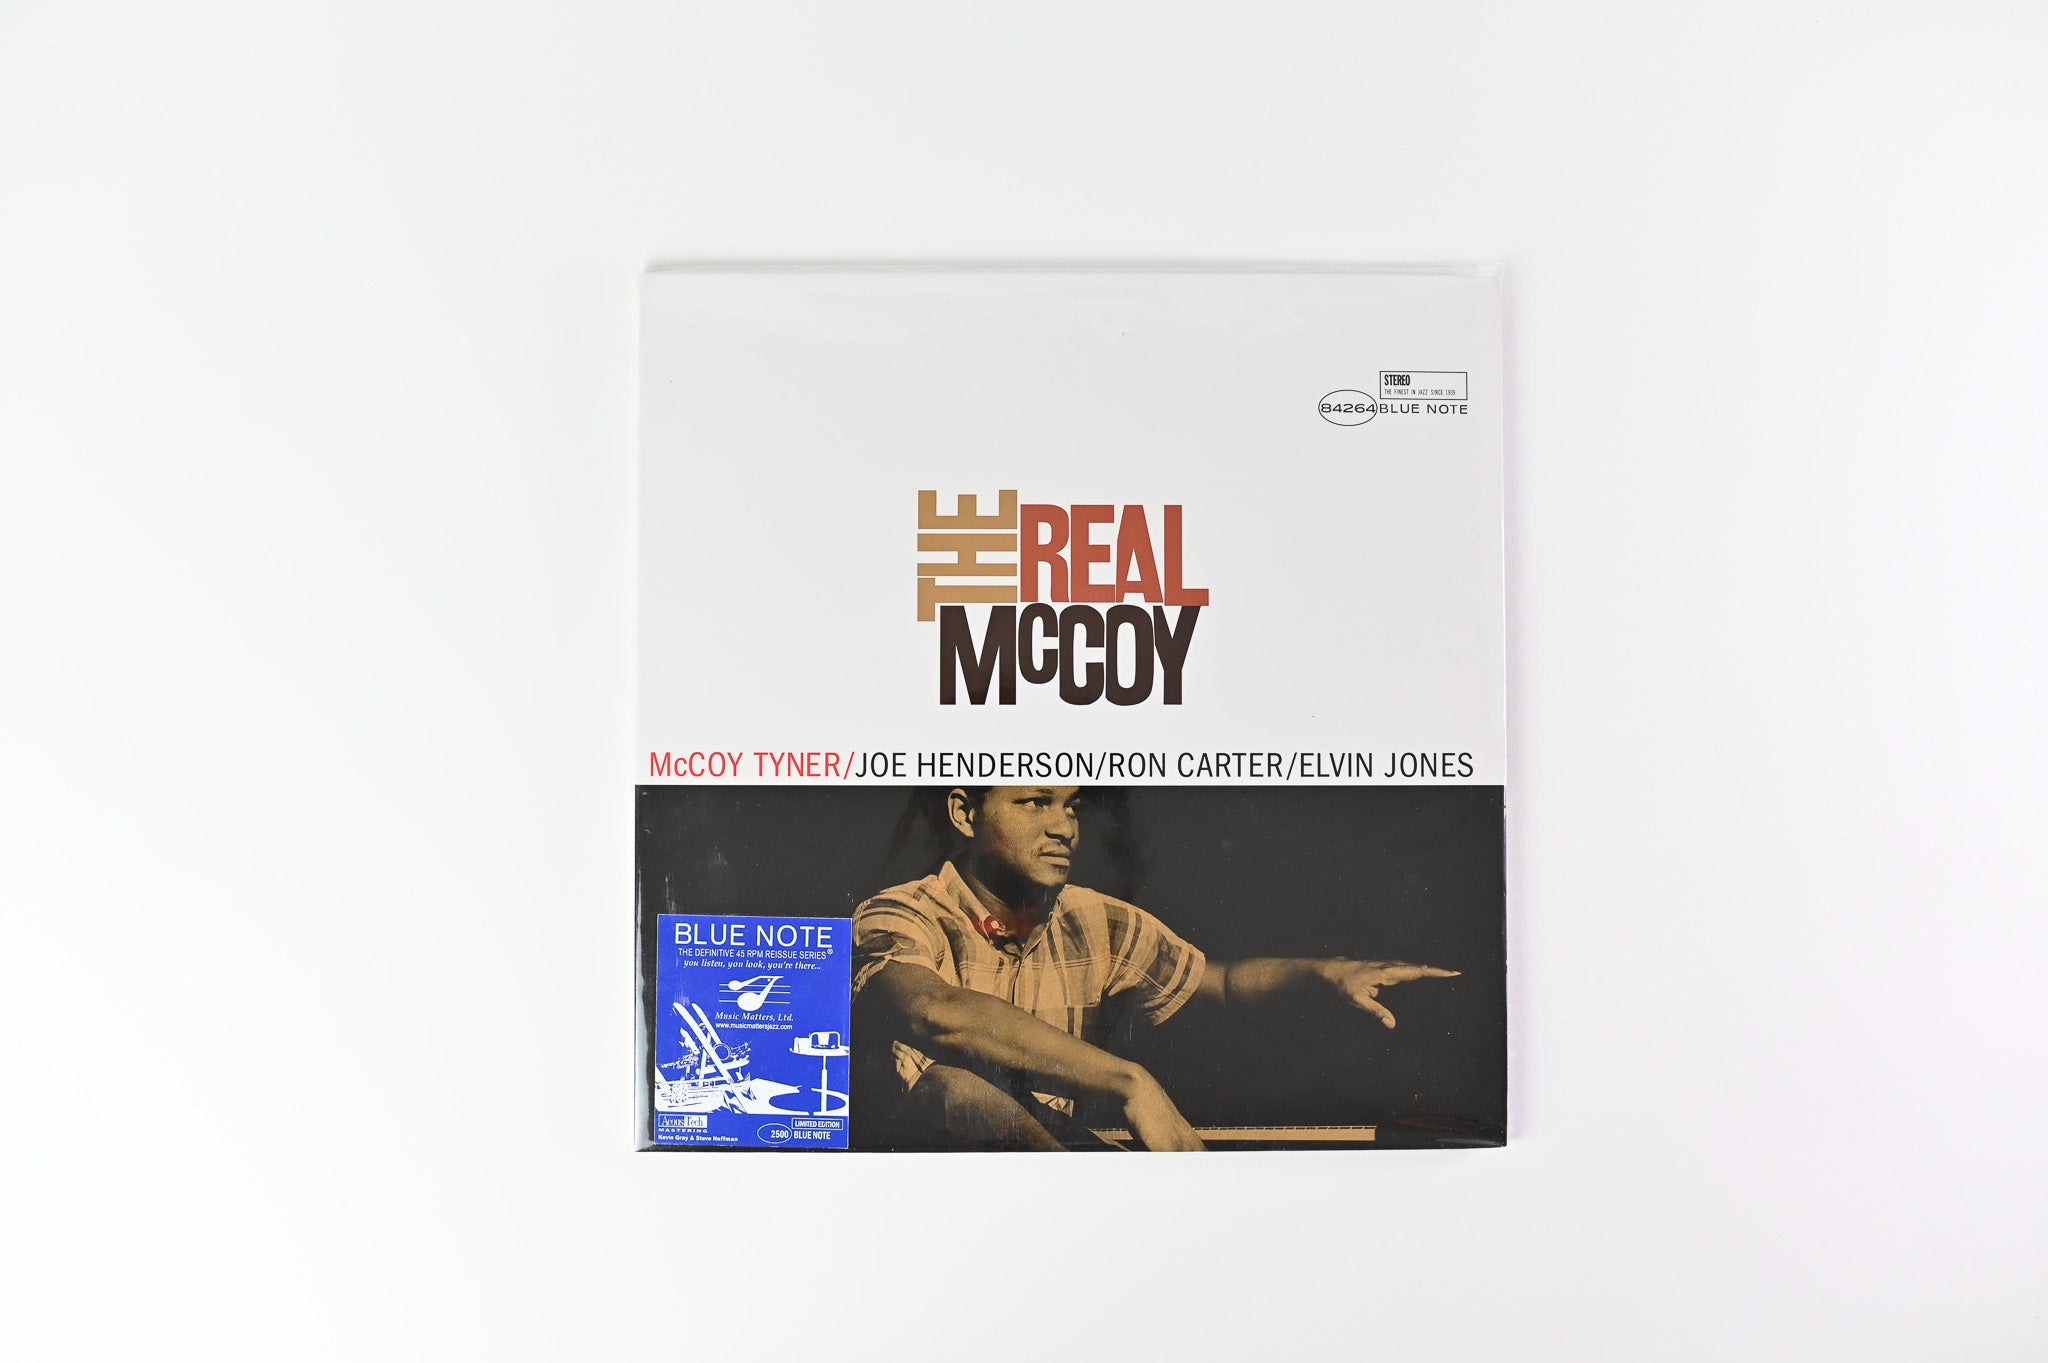 McCoy Tyner - The Real McCoy on Blue Note Music Matters Ltd Numbered Reissue 45 RPM